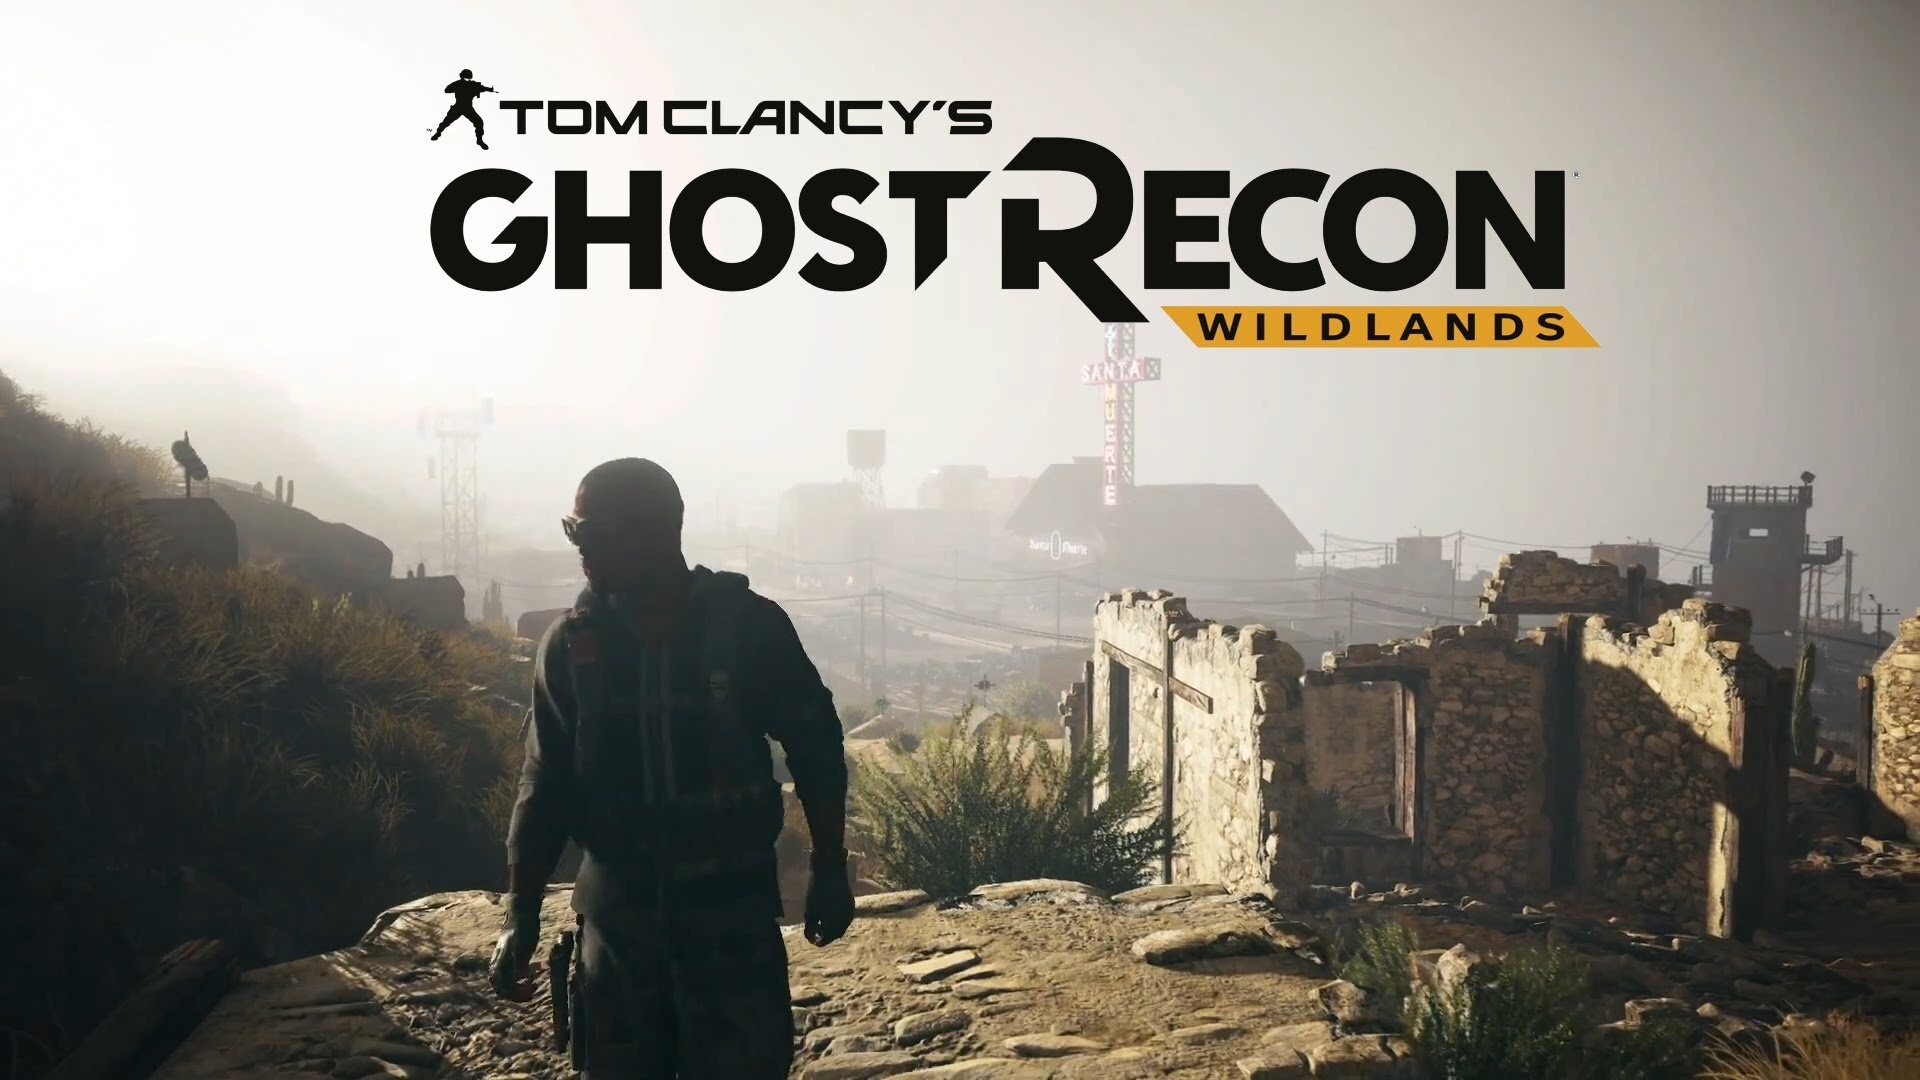 Ghost Recon: Wildlands: The first game in the Tom Clancy's series to feature an open-world environment. 1920x1080 Full HD Wallpaper.